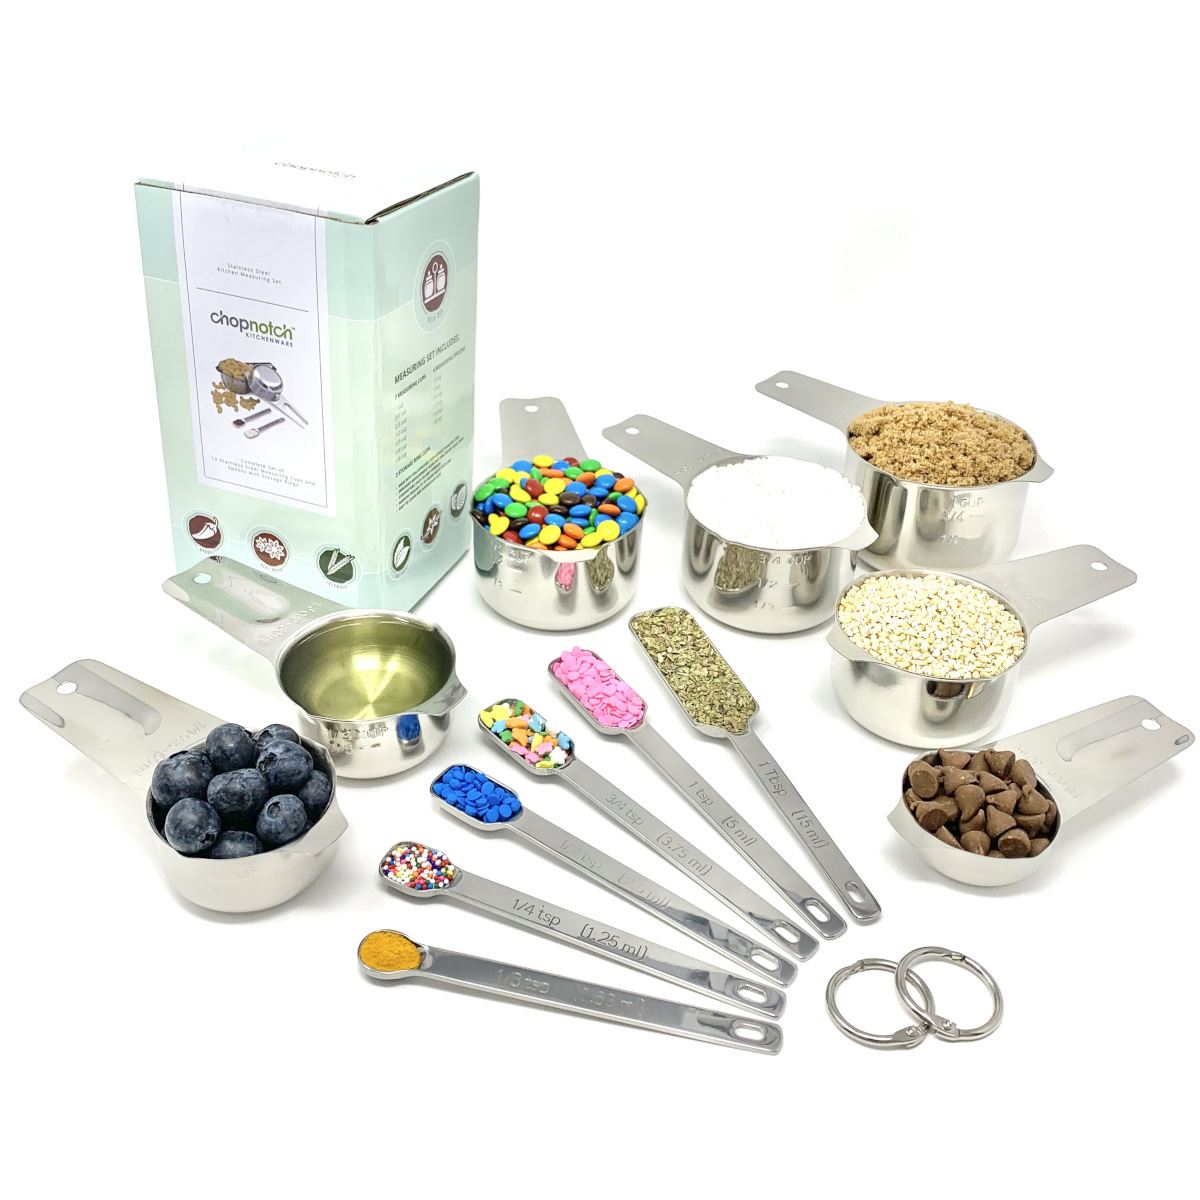 The measuring cups and spoons spread out and filled with ingredients.